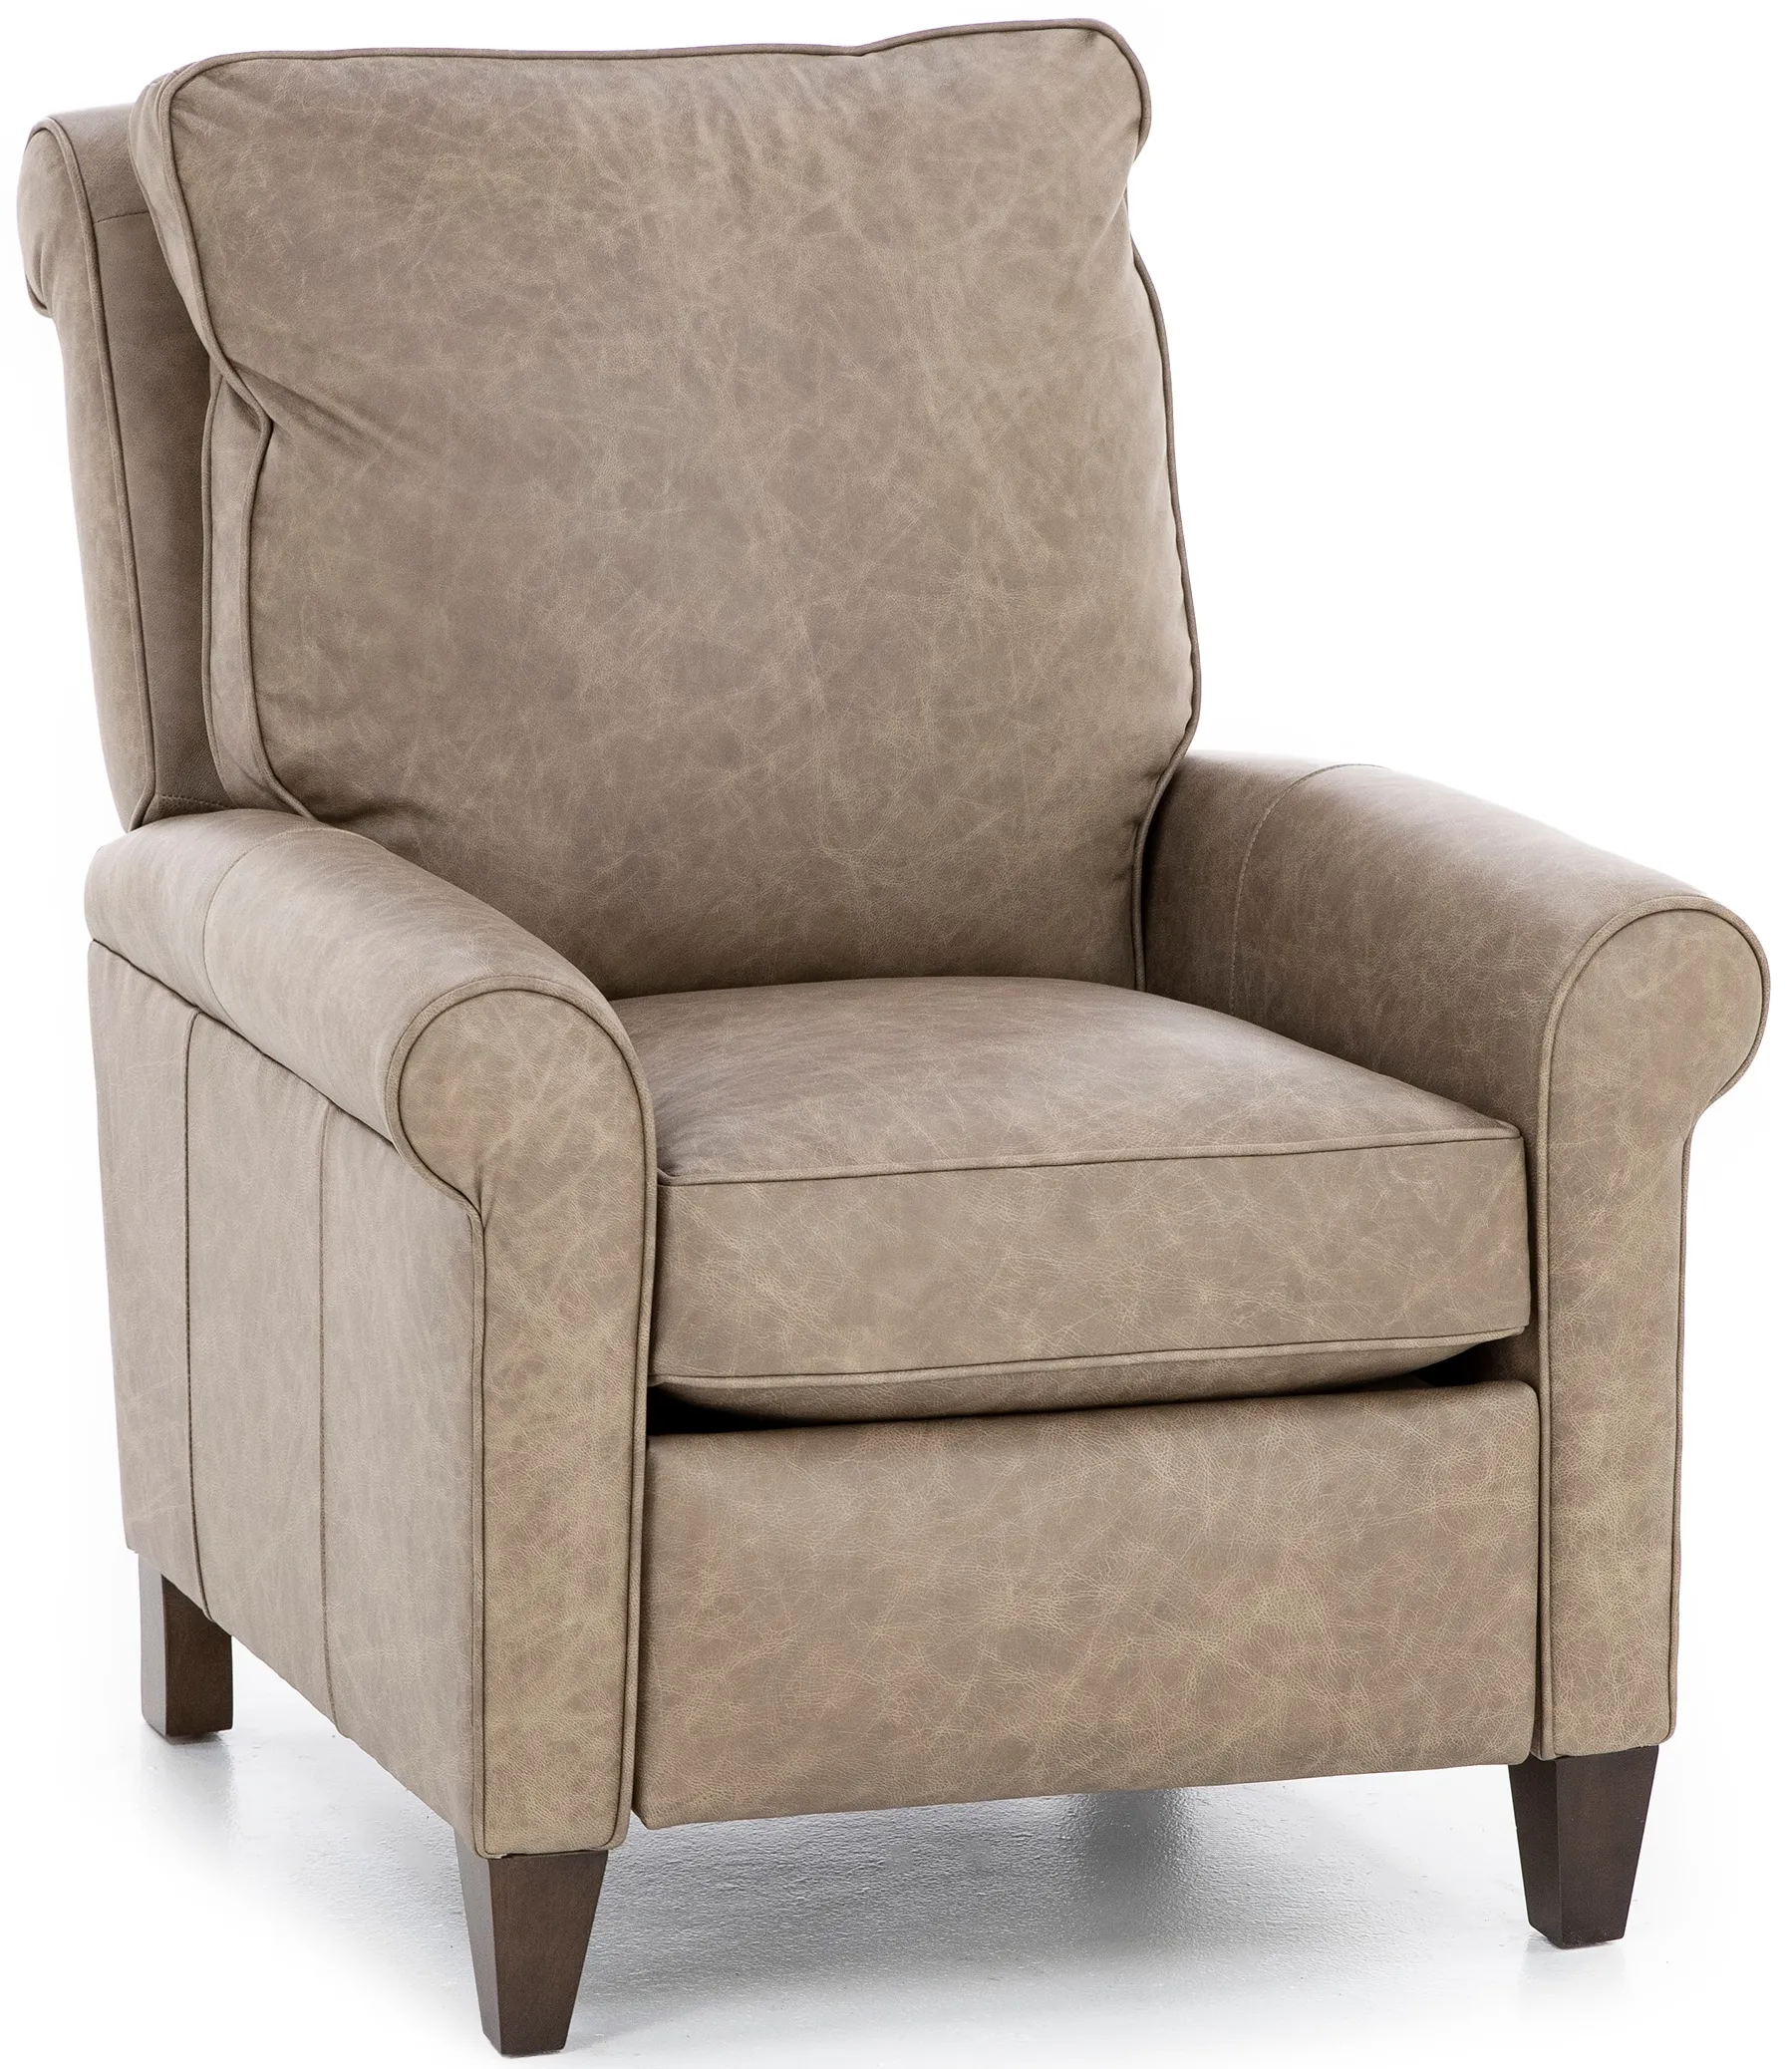 Danica Leather Pushback Recliner